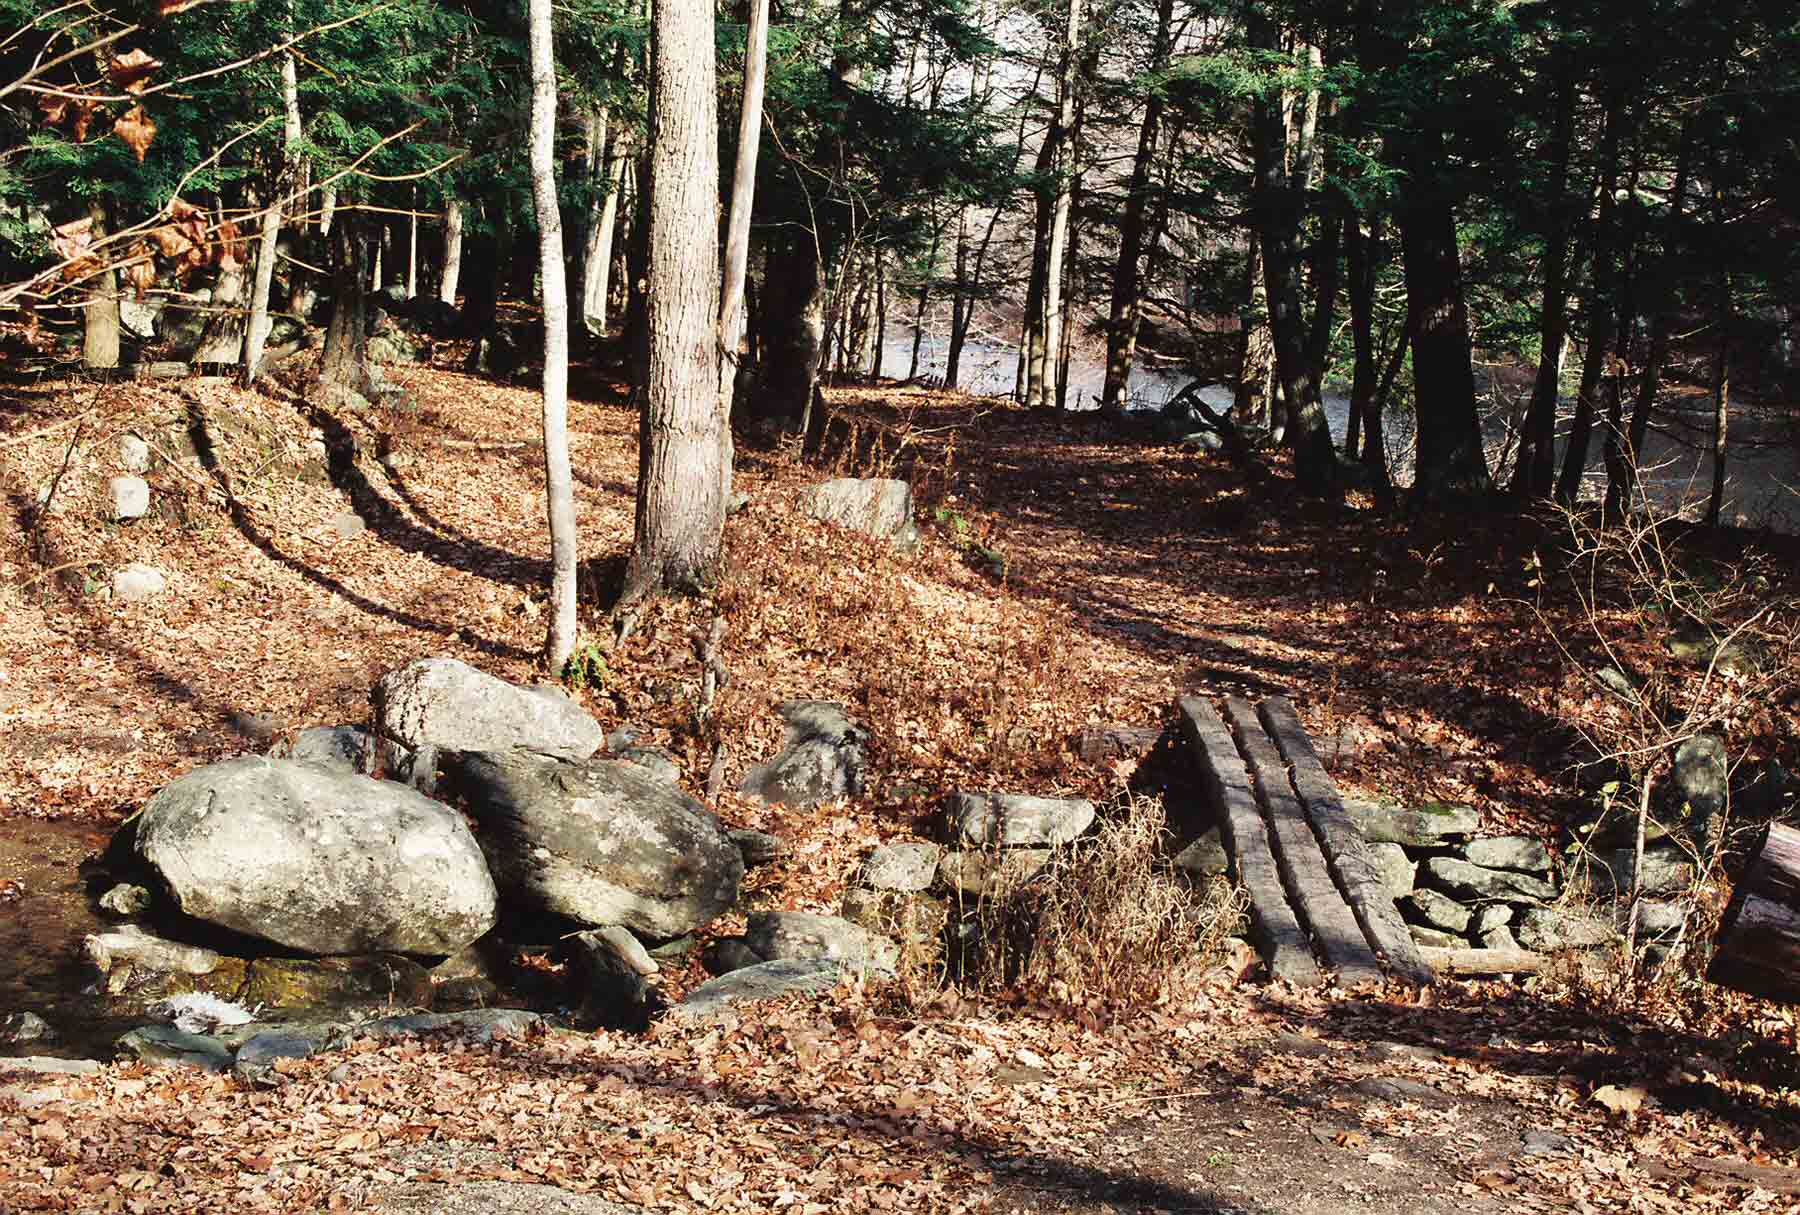 mm 3.7 - "River Walk" section of the AT as it crosses Stony Brook.  Courtesy dlcul@conncoll.edu